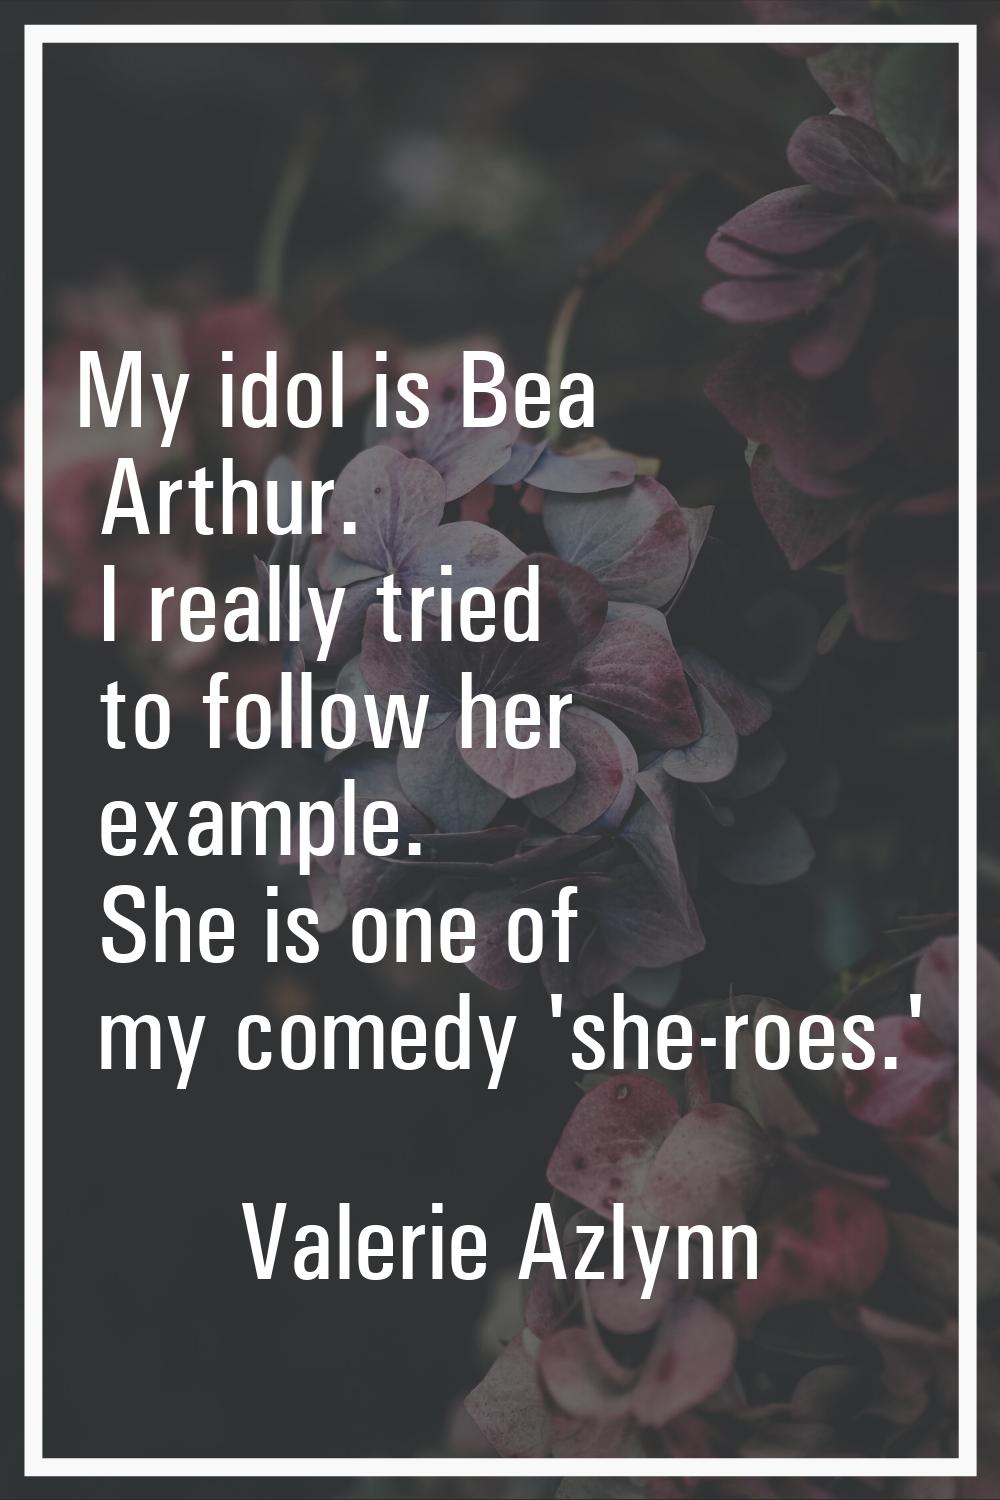 My idol is Bea Arthur. I really tried to follow her example. She is one of my comedy 'she-roes.'